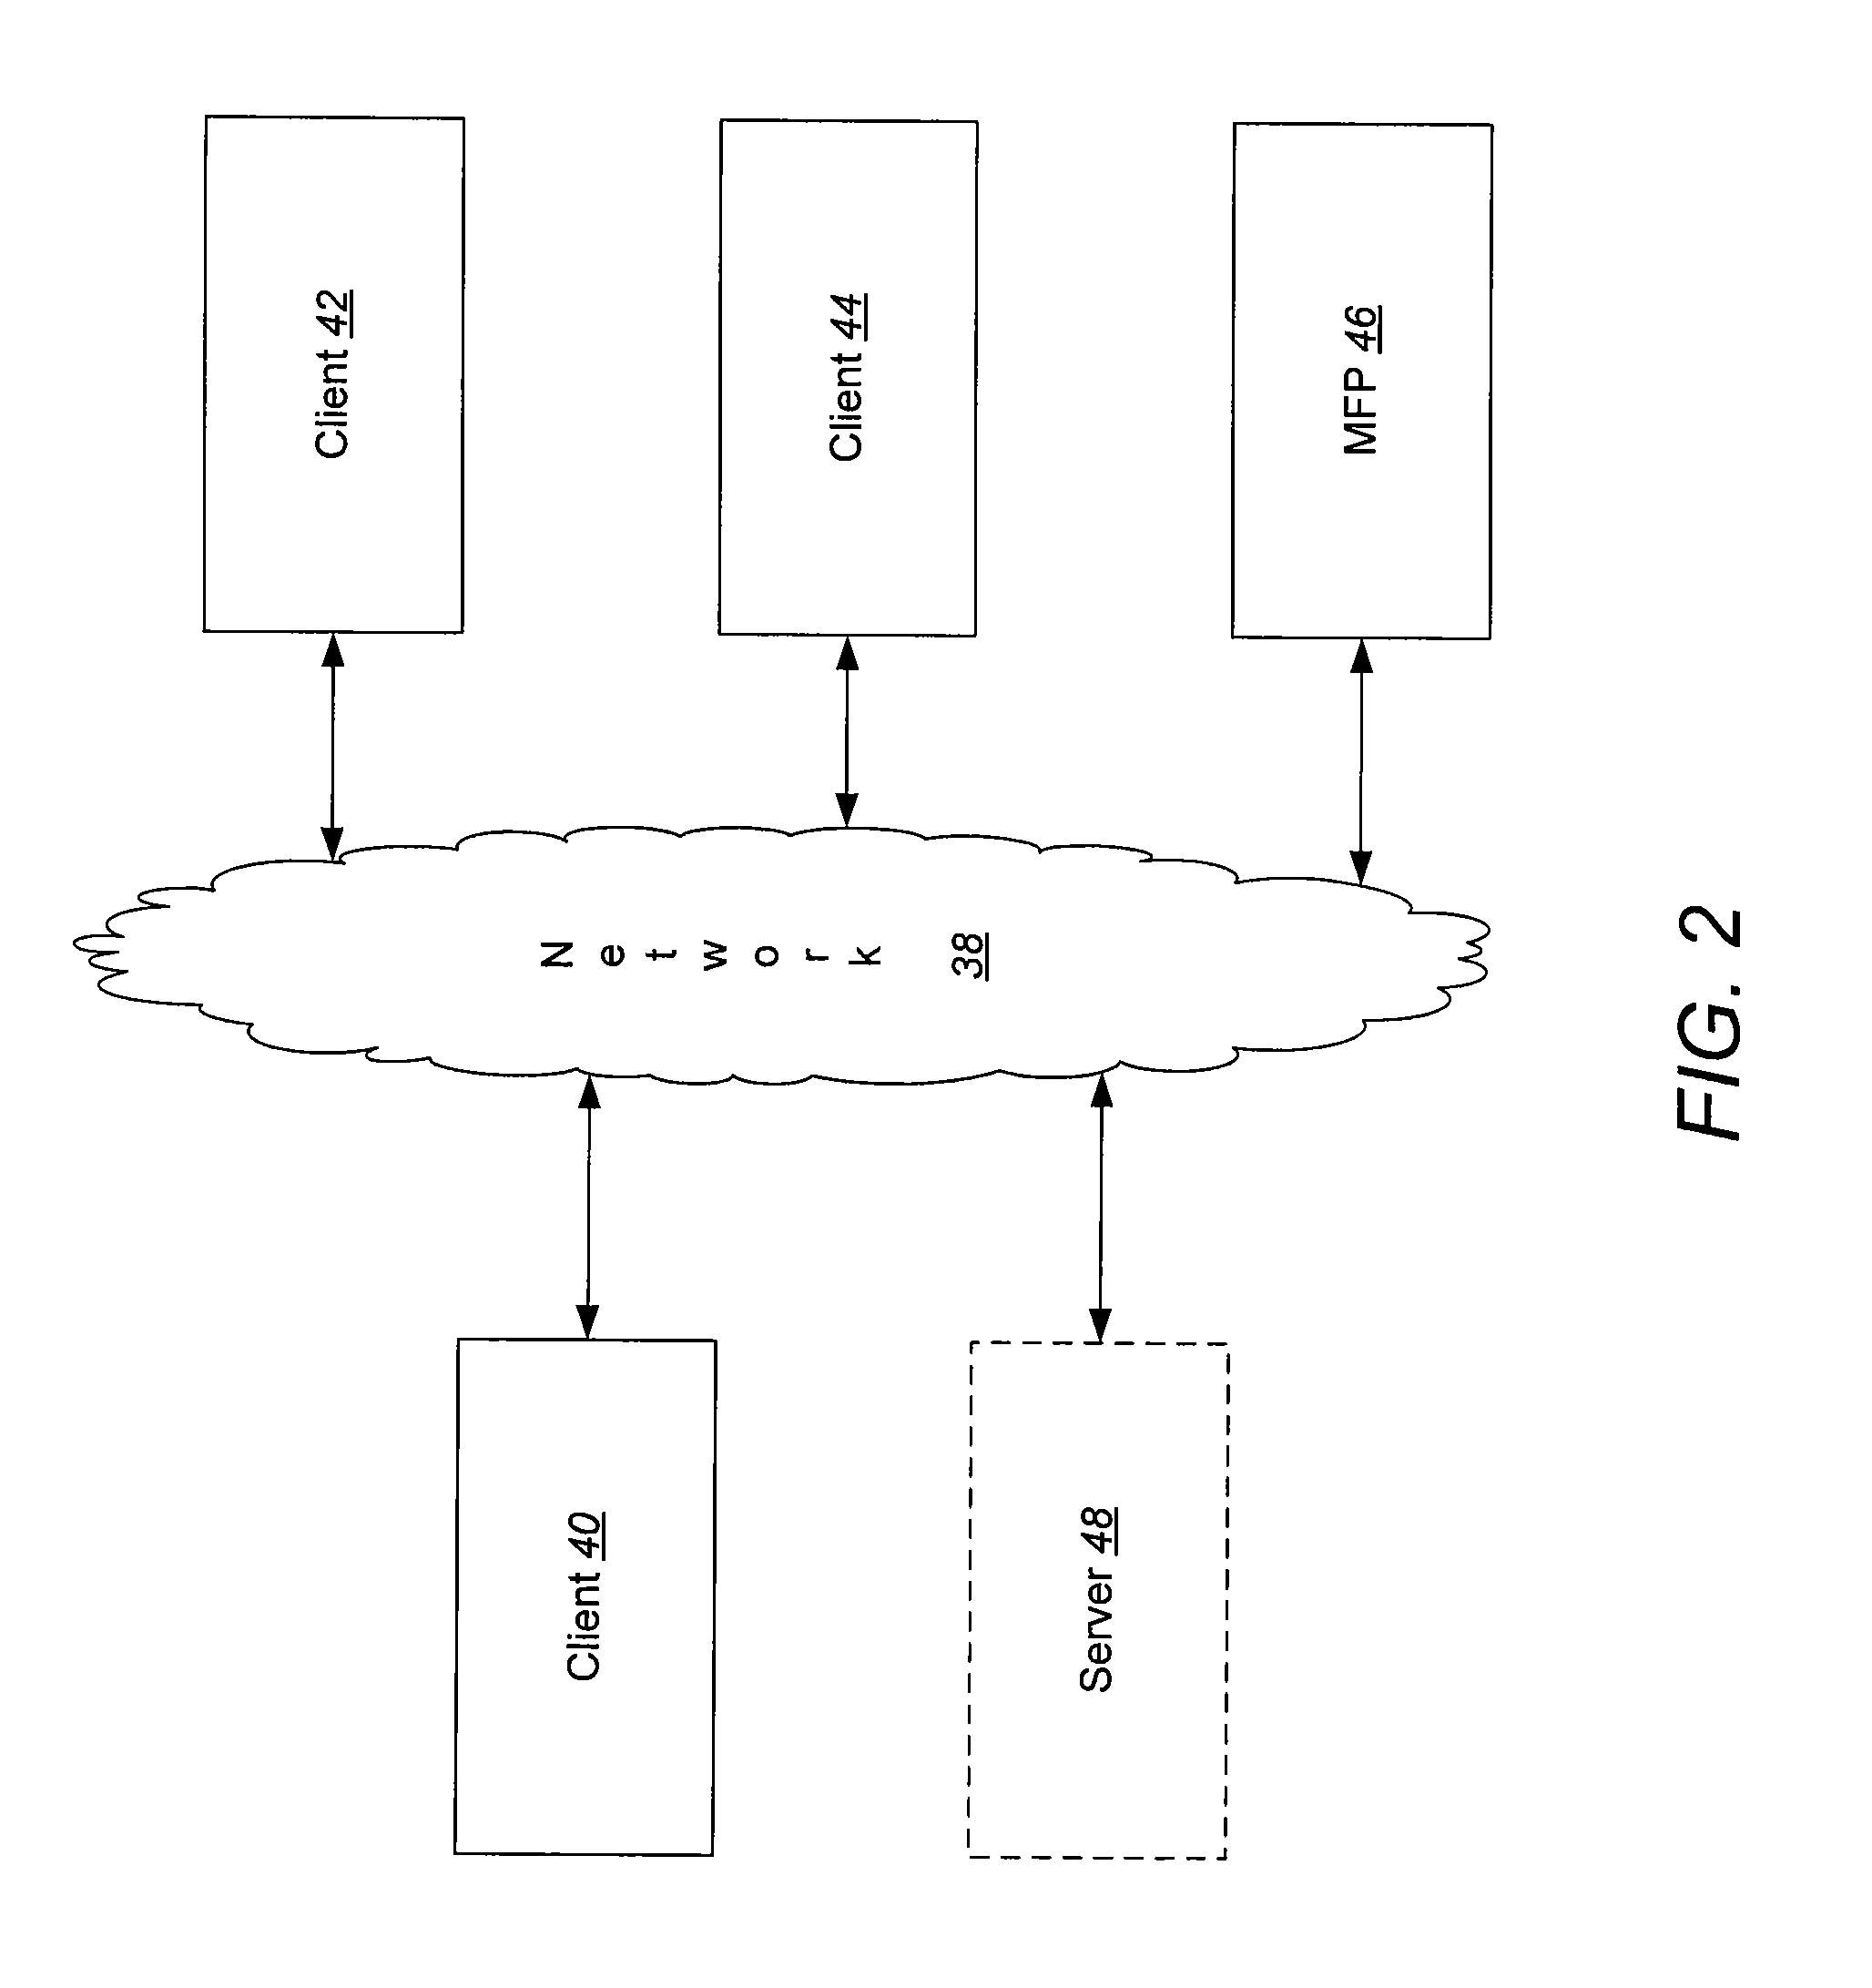 Miniturization techniques, systems, and apparatus relatng to power supplies, memory, interconnections, and leds